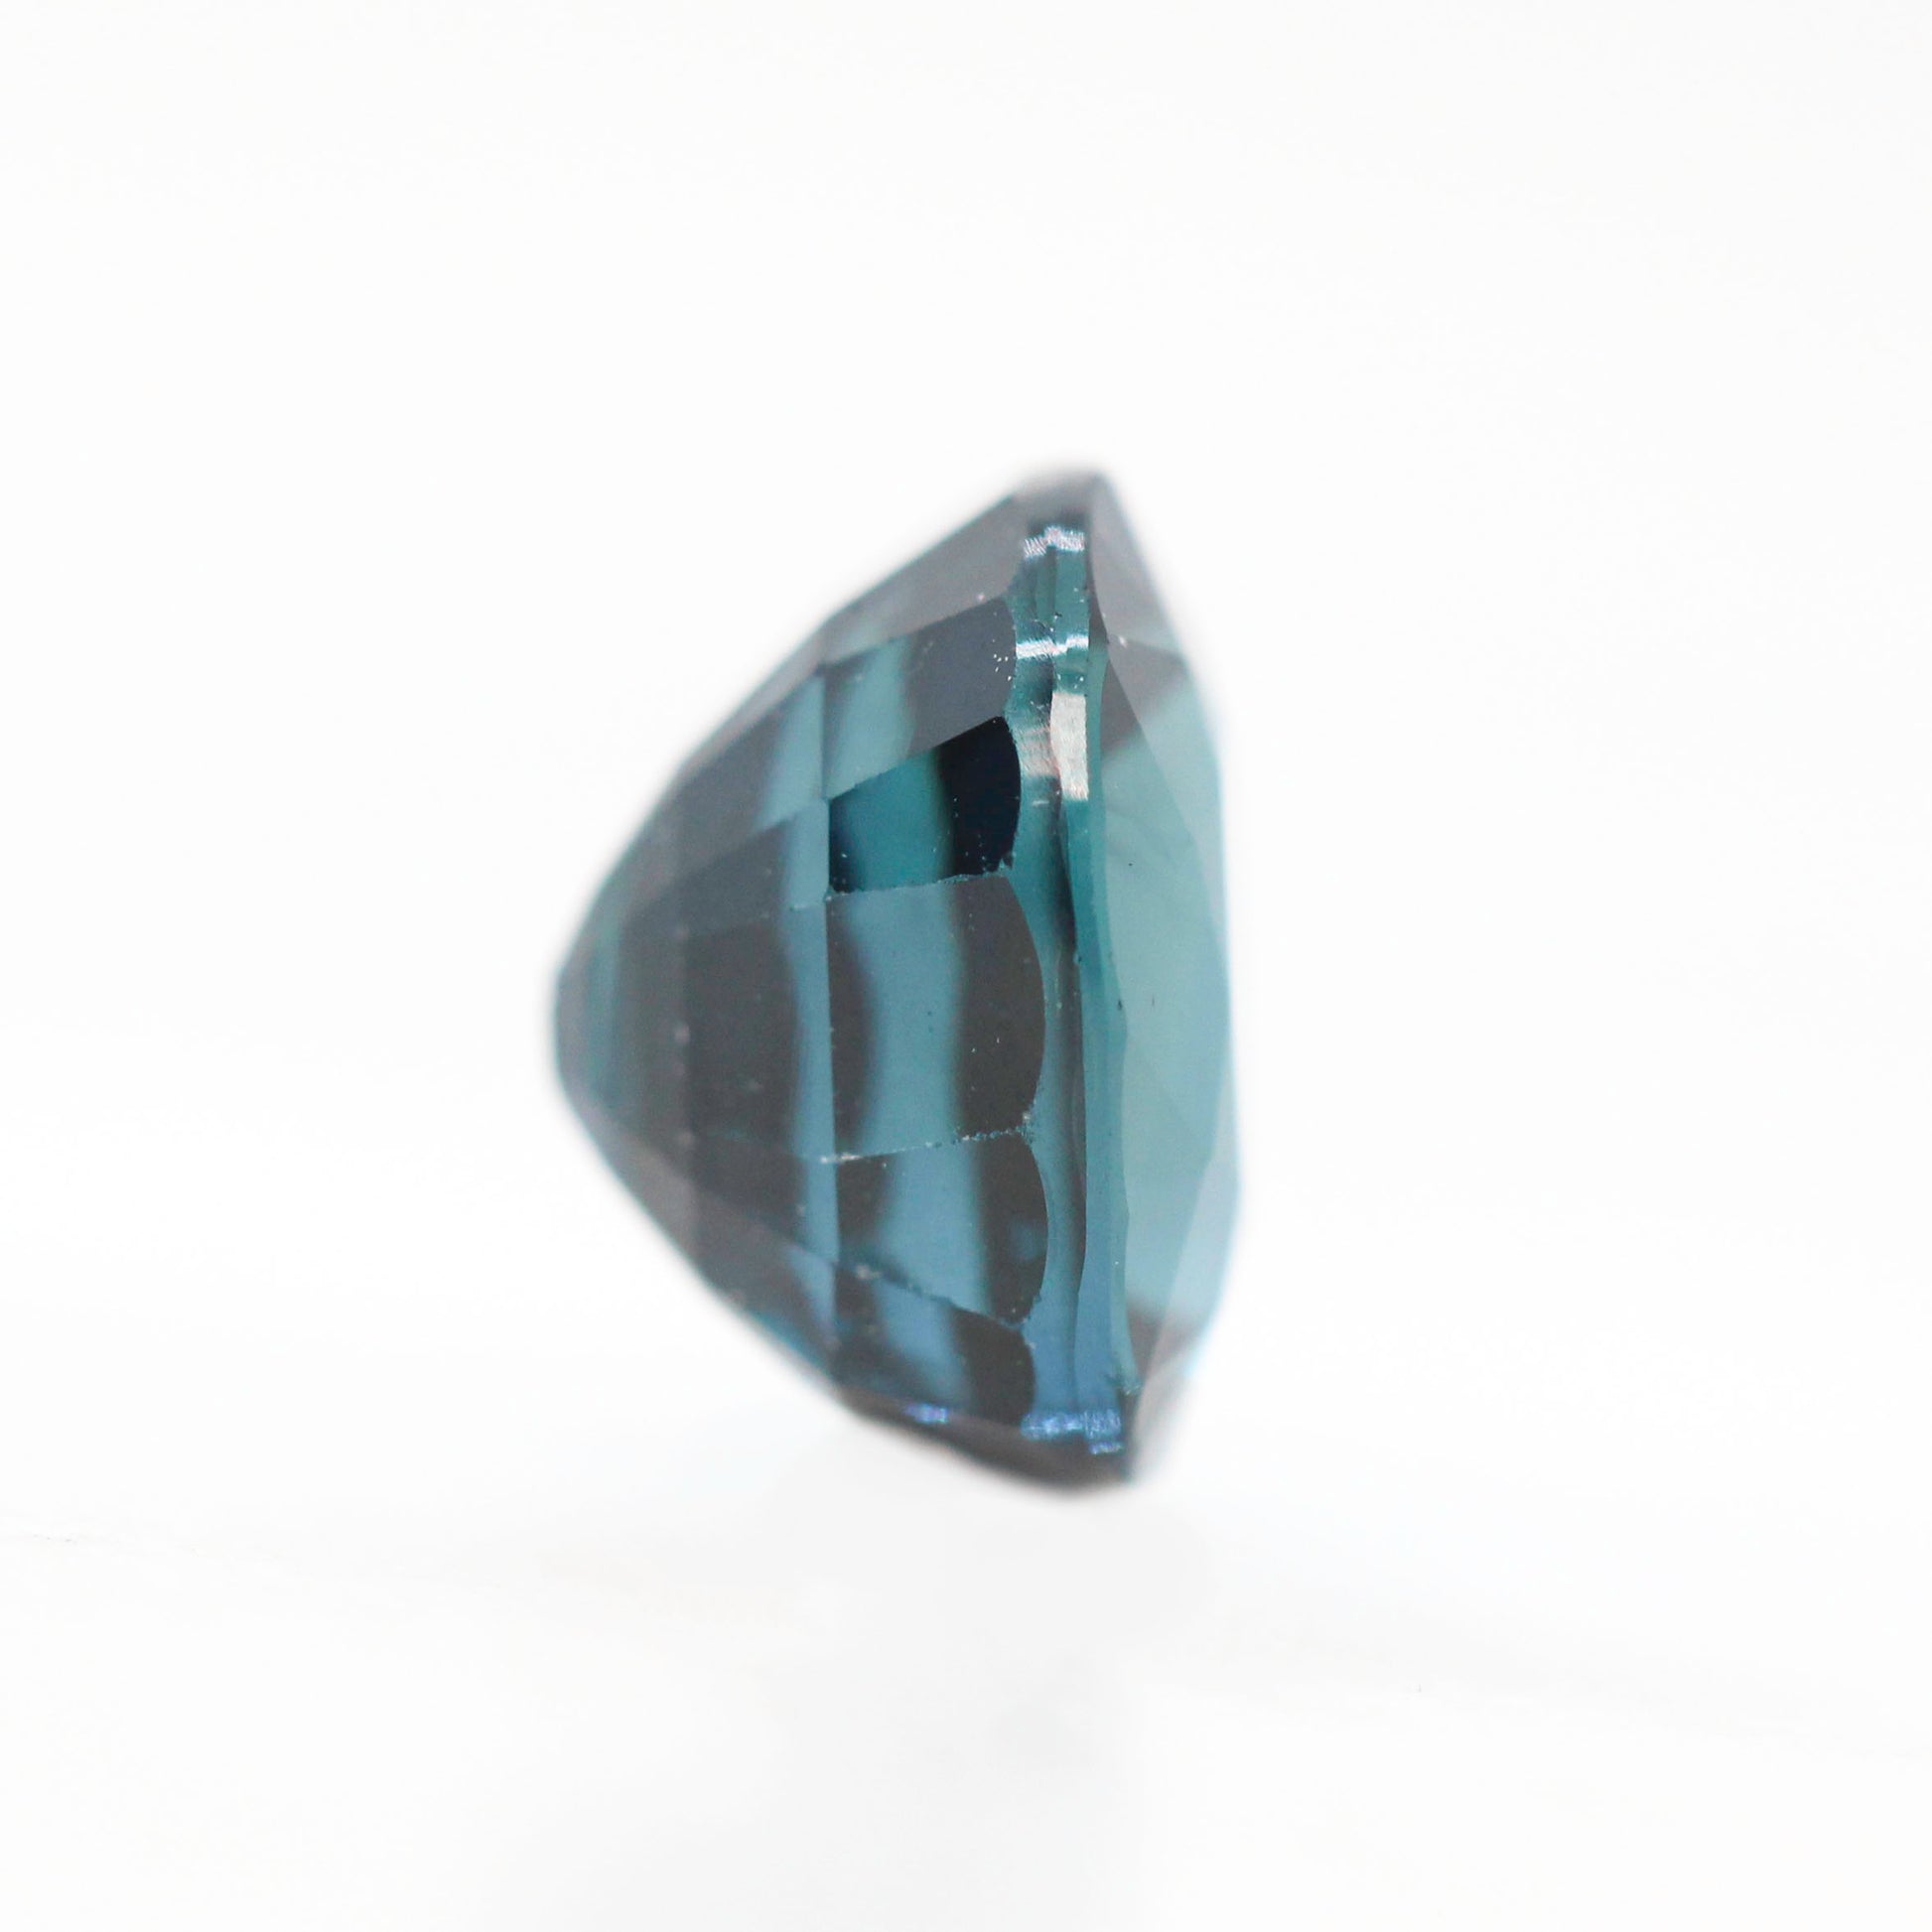 2.03 Carat Teal Blue Oval Sapphire for Custom Work - Inventory Code TBOS203 - Midwinter Co. Alternative Bridal Rings and Modern Fine Jewelry